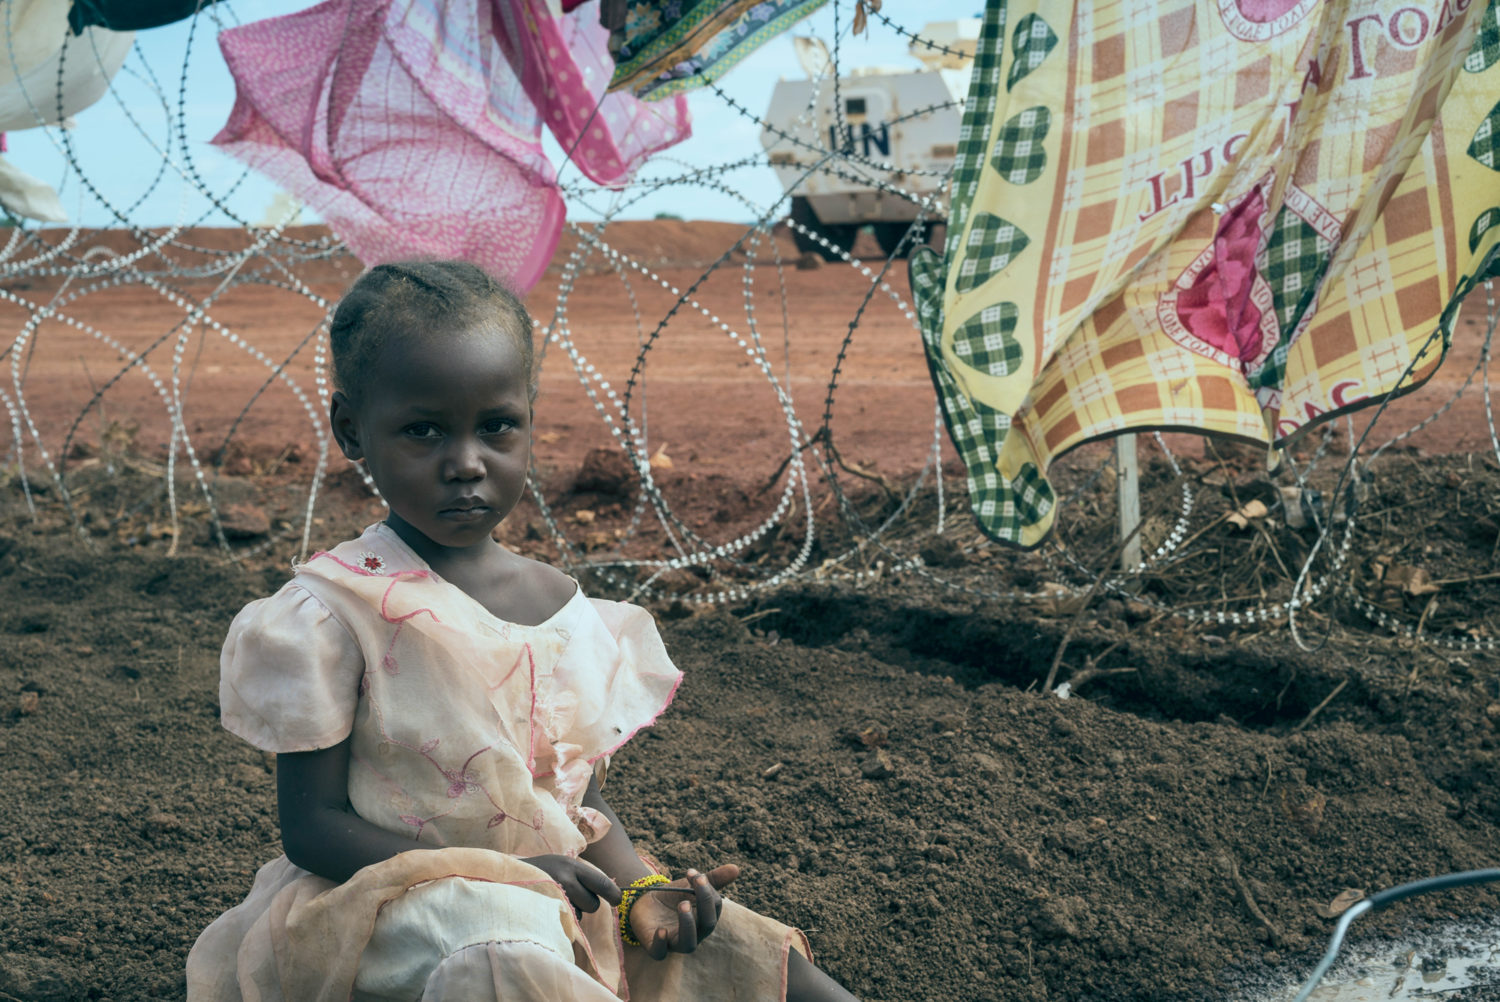 Niema, 3, sits on the ground while her mother washes clothes in a Protection of Civilians Site in South Sudan. Unicef/2016/Ohanesian